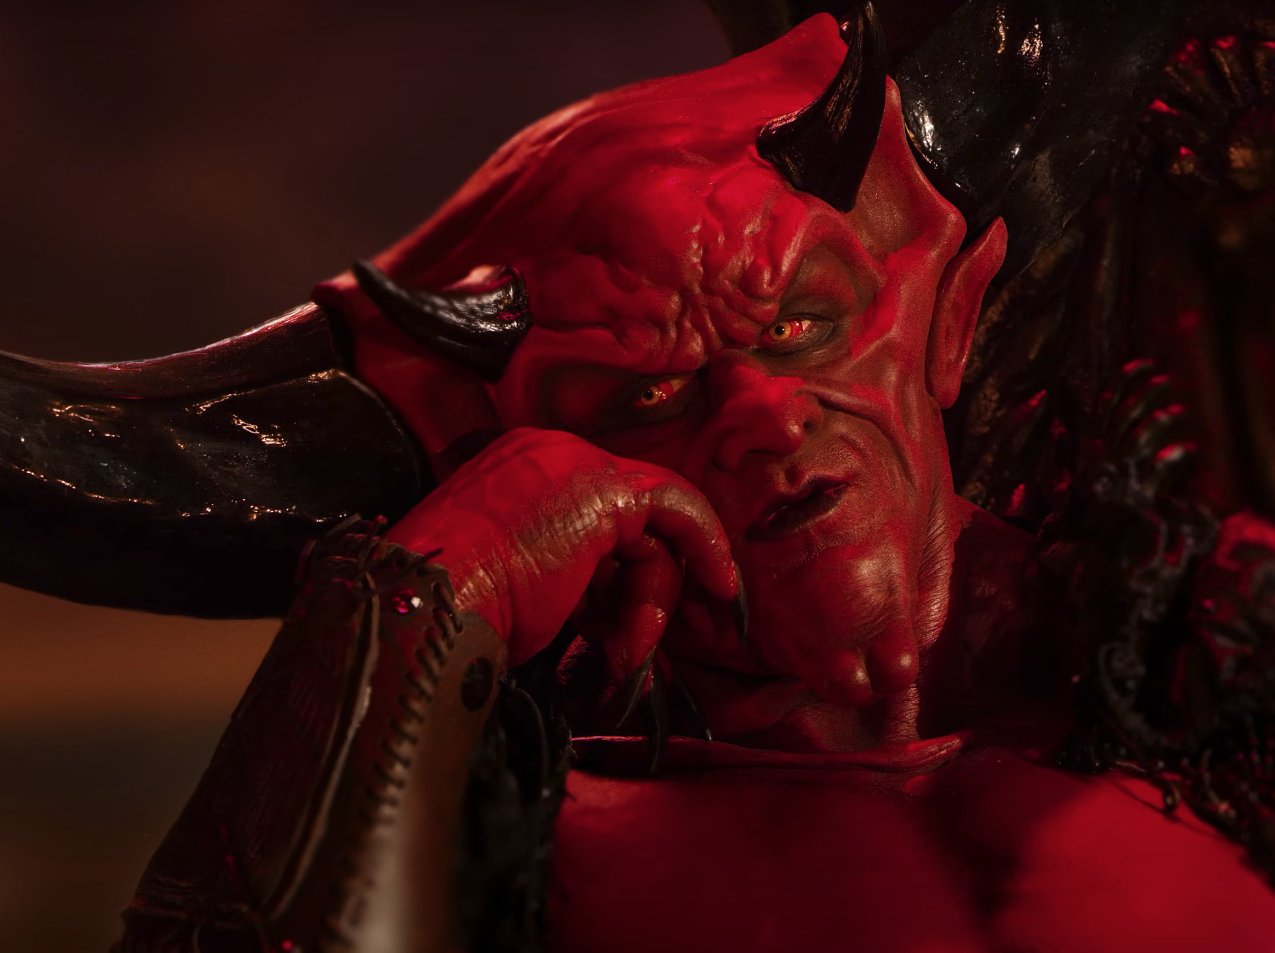 Pantozzi on Twitter: "It is wild to me many people are calling the dude from that @VancityReynolds Match commercial "Satan" when he's clearly Tim Curry's Darkness from Legend. THE CHIN,